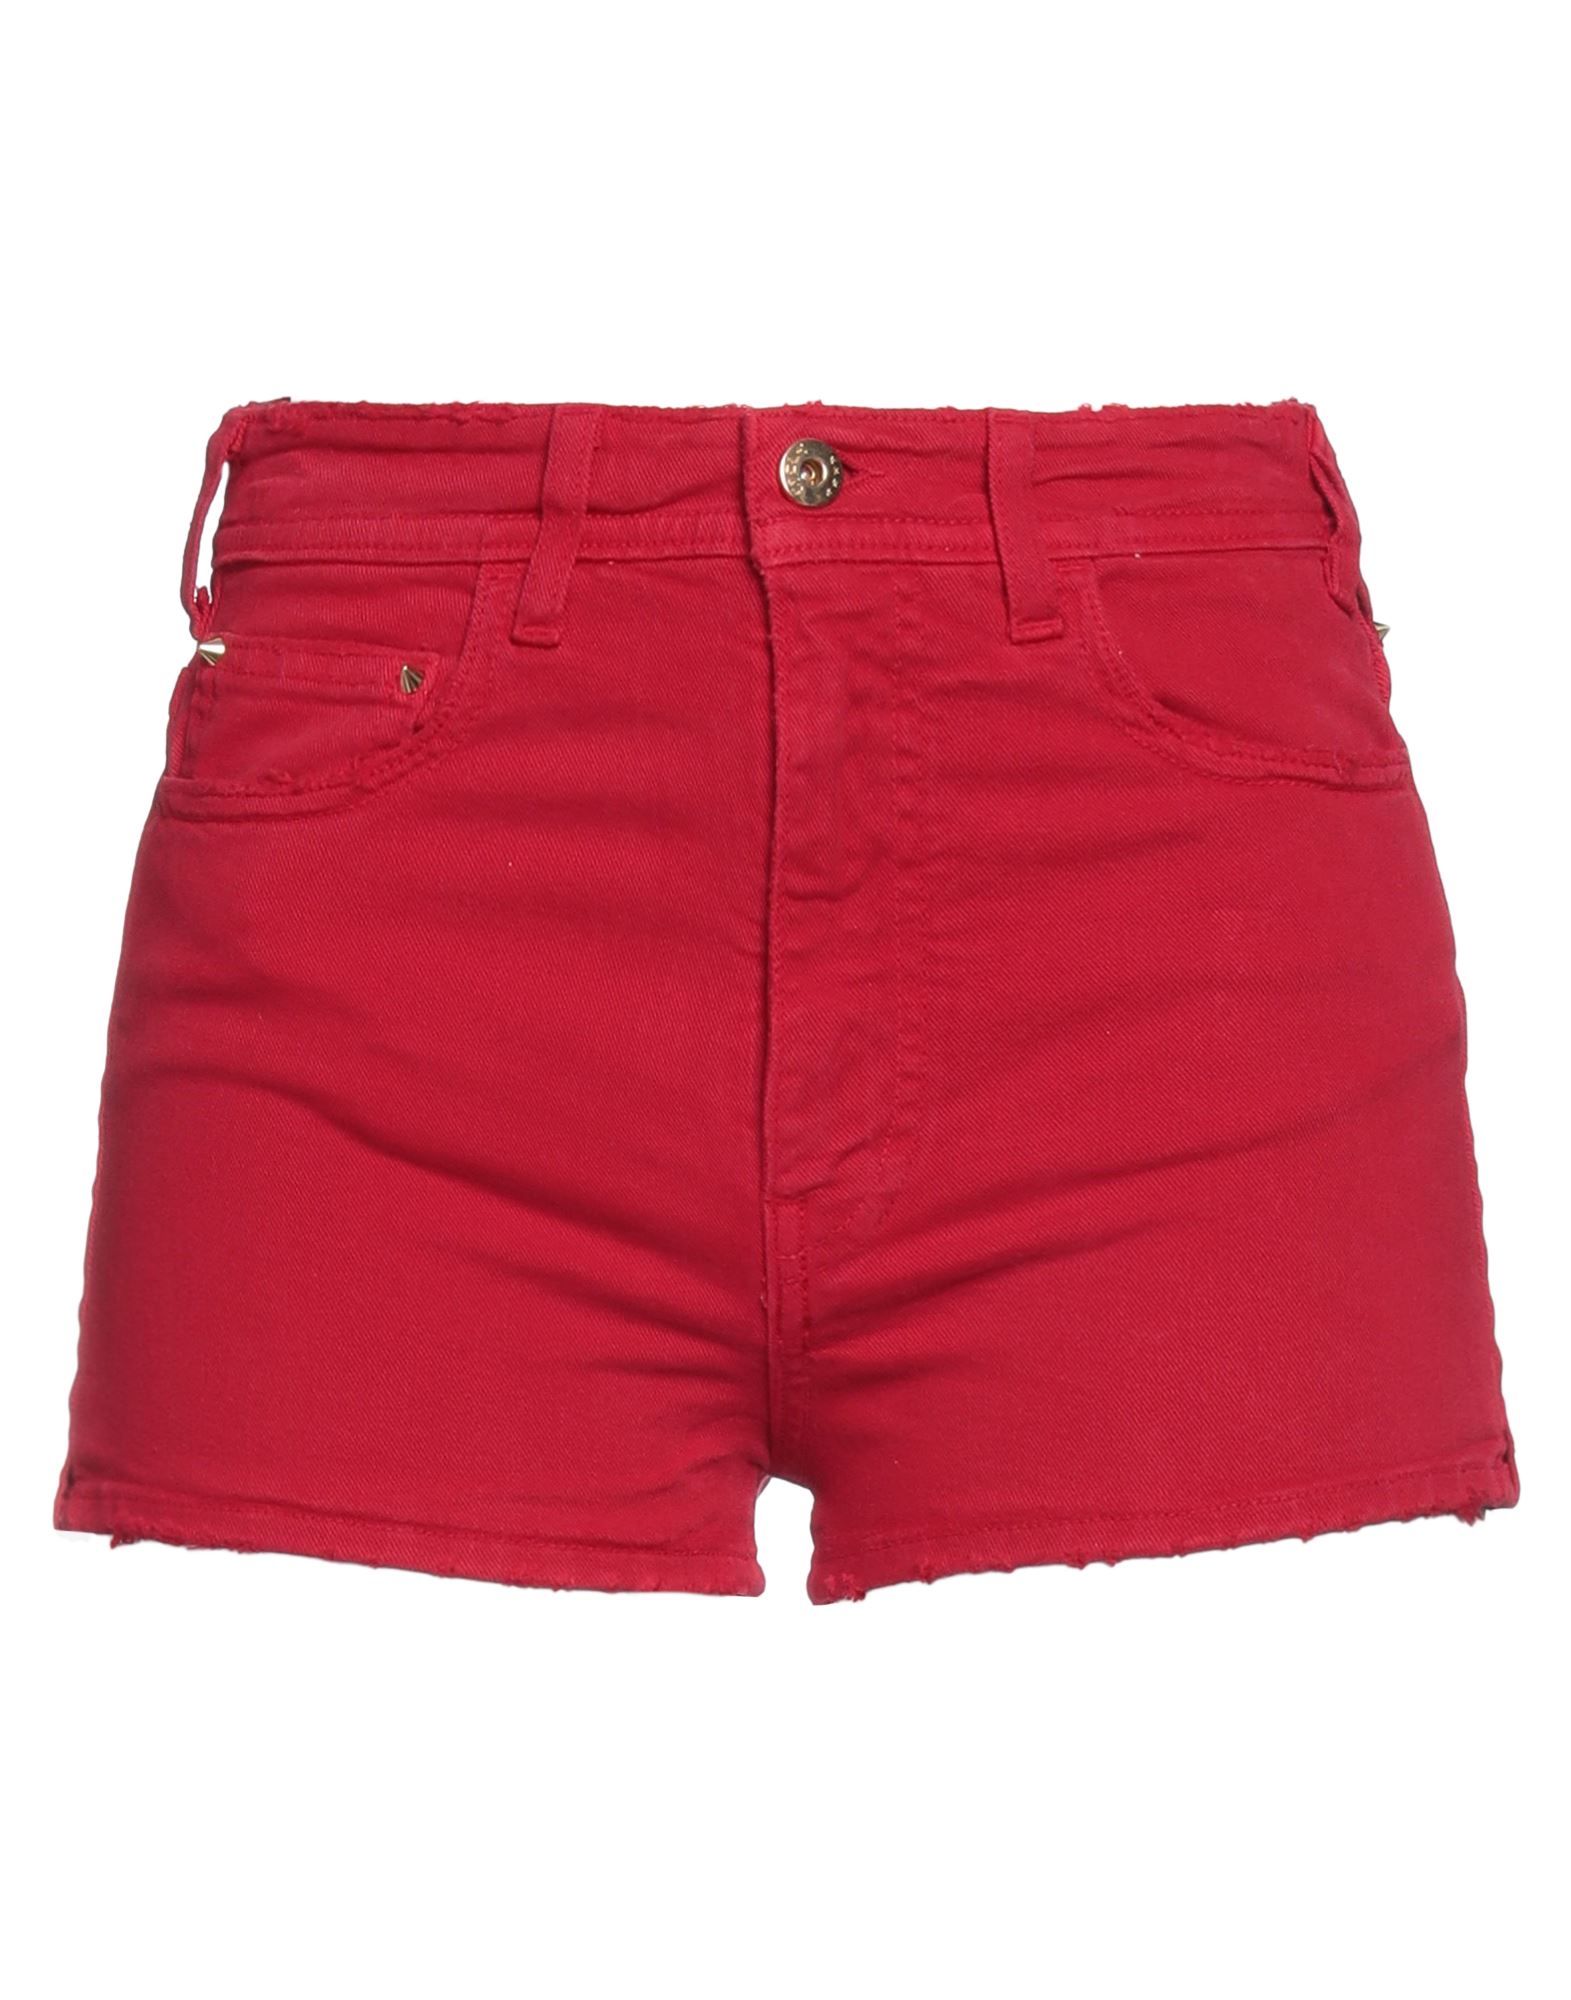 CYCLE Jeansshorts Damen Rot von CYCLE